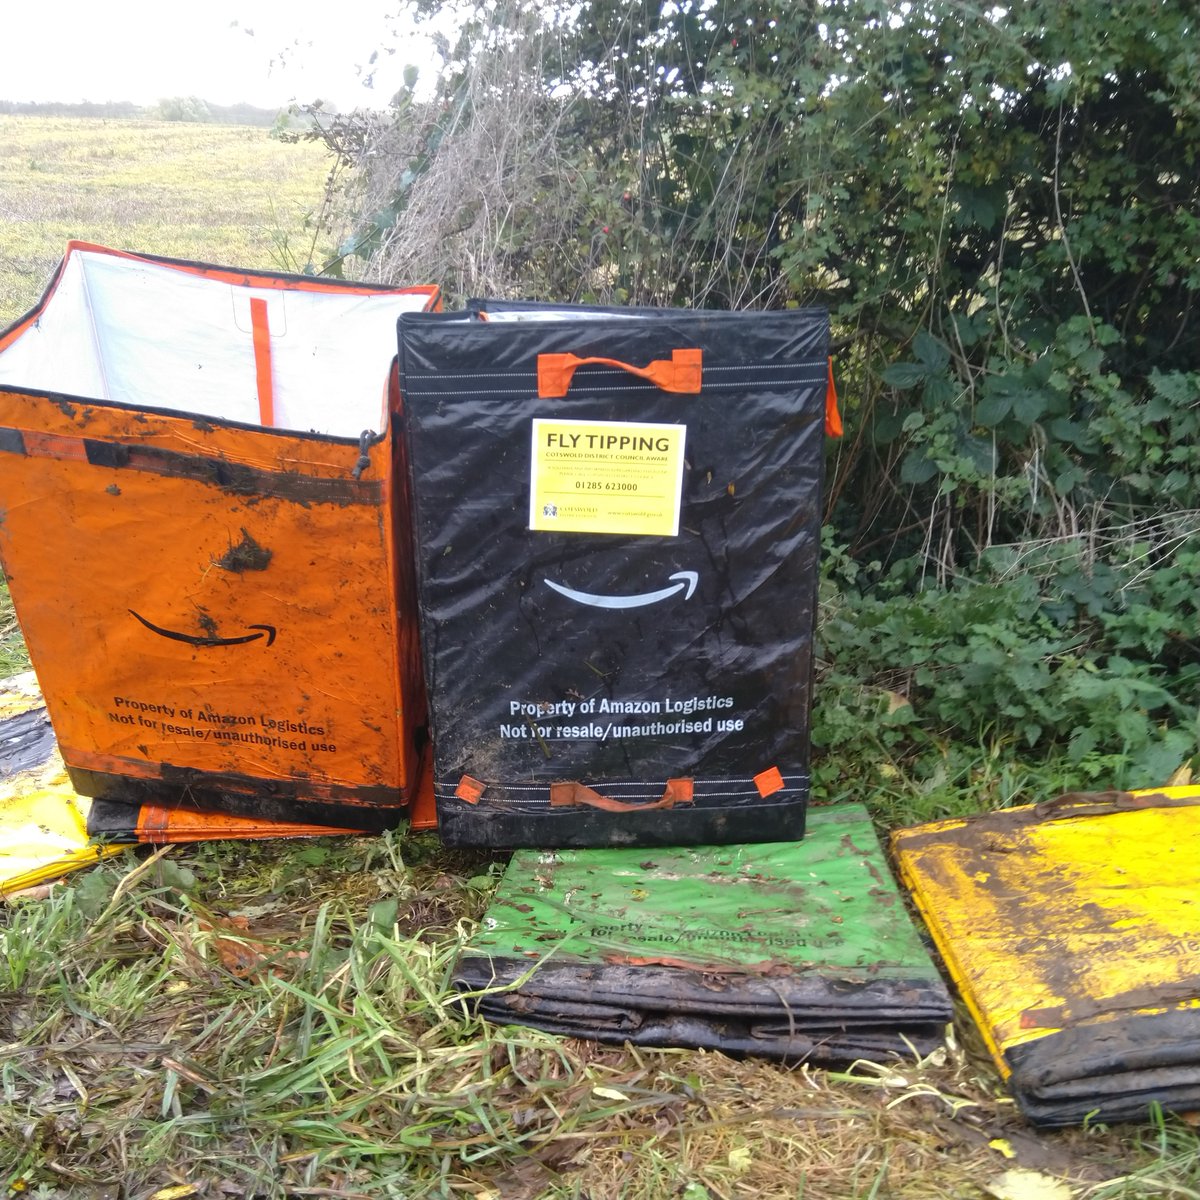 🚨 Witness Appeal 🚯 Do you have information about a #flytip on Furze Lane between Chipping Campden and Hidcote Boyce? We are asking anyone with information about this incident to contact: ers@cotswold.gov.uk Report illegal #flytipping online 👉 cotswold.gov.uk/flytipping